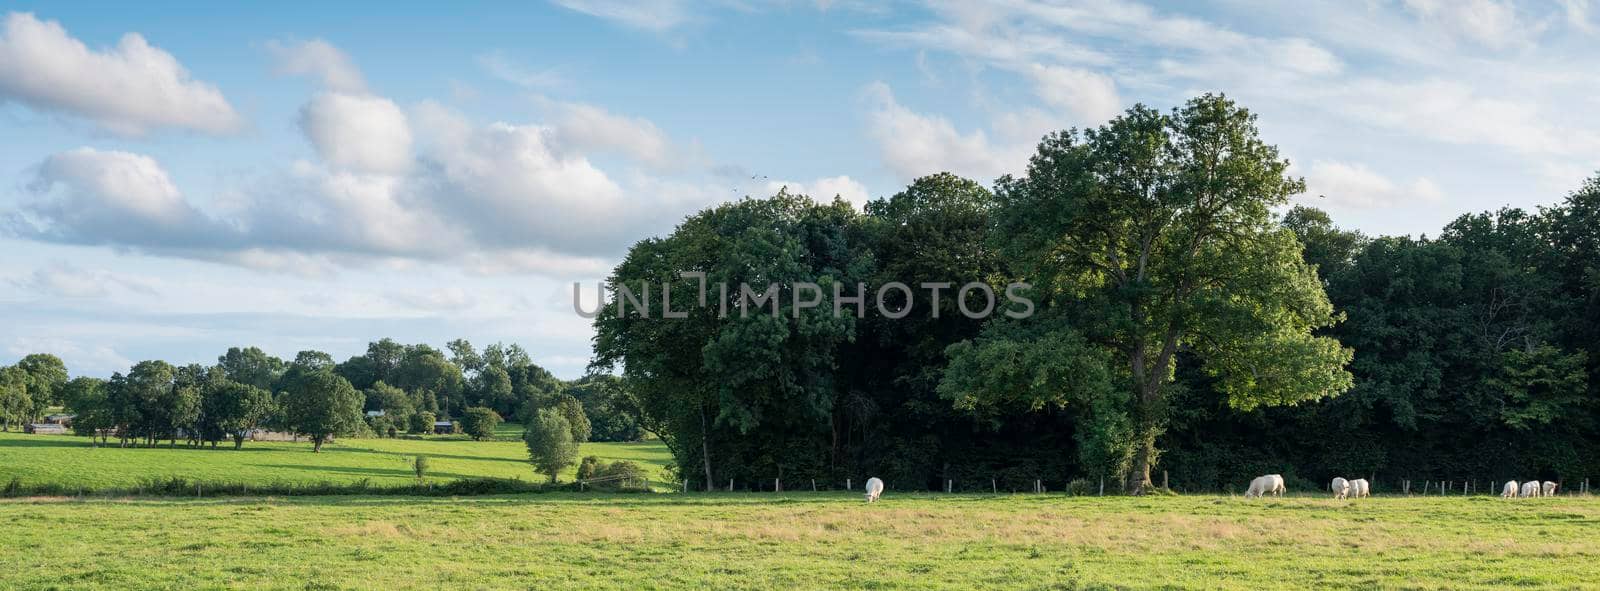 cows and trees near meadow with cows in french natural park boucles de la seine between rouen and le havre in france by ahavelaar